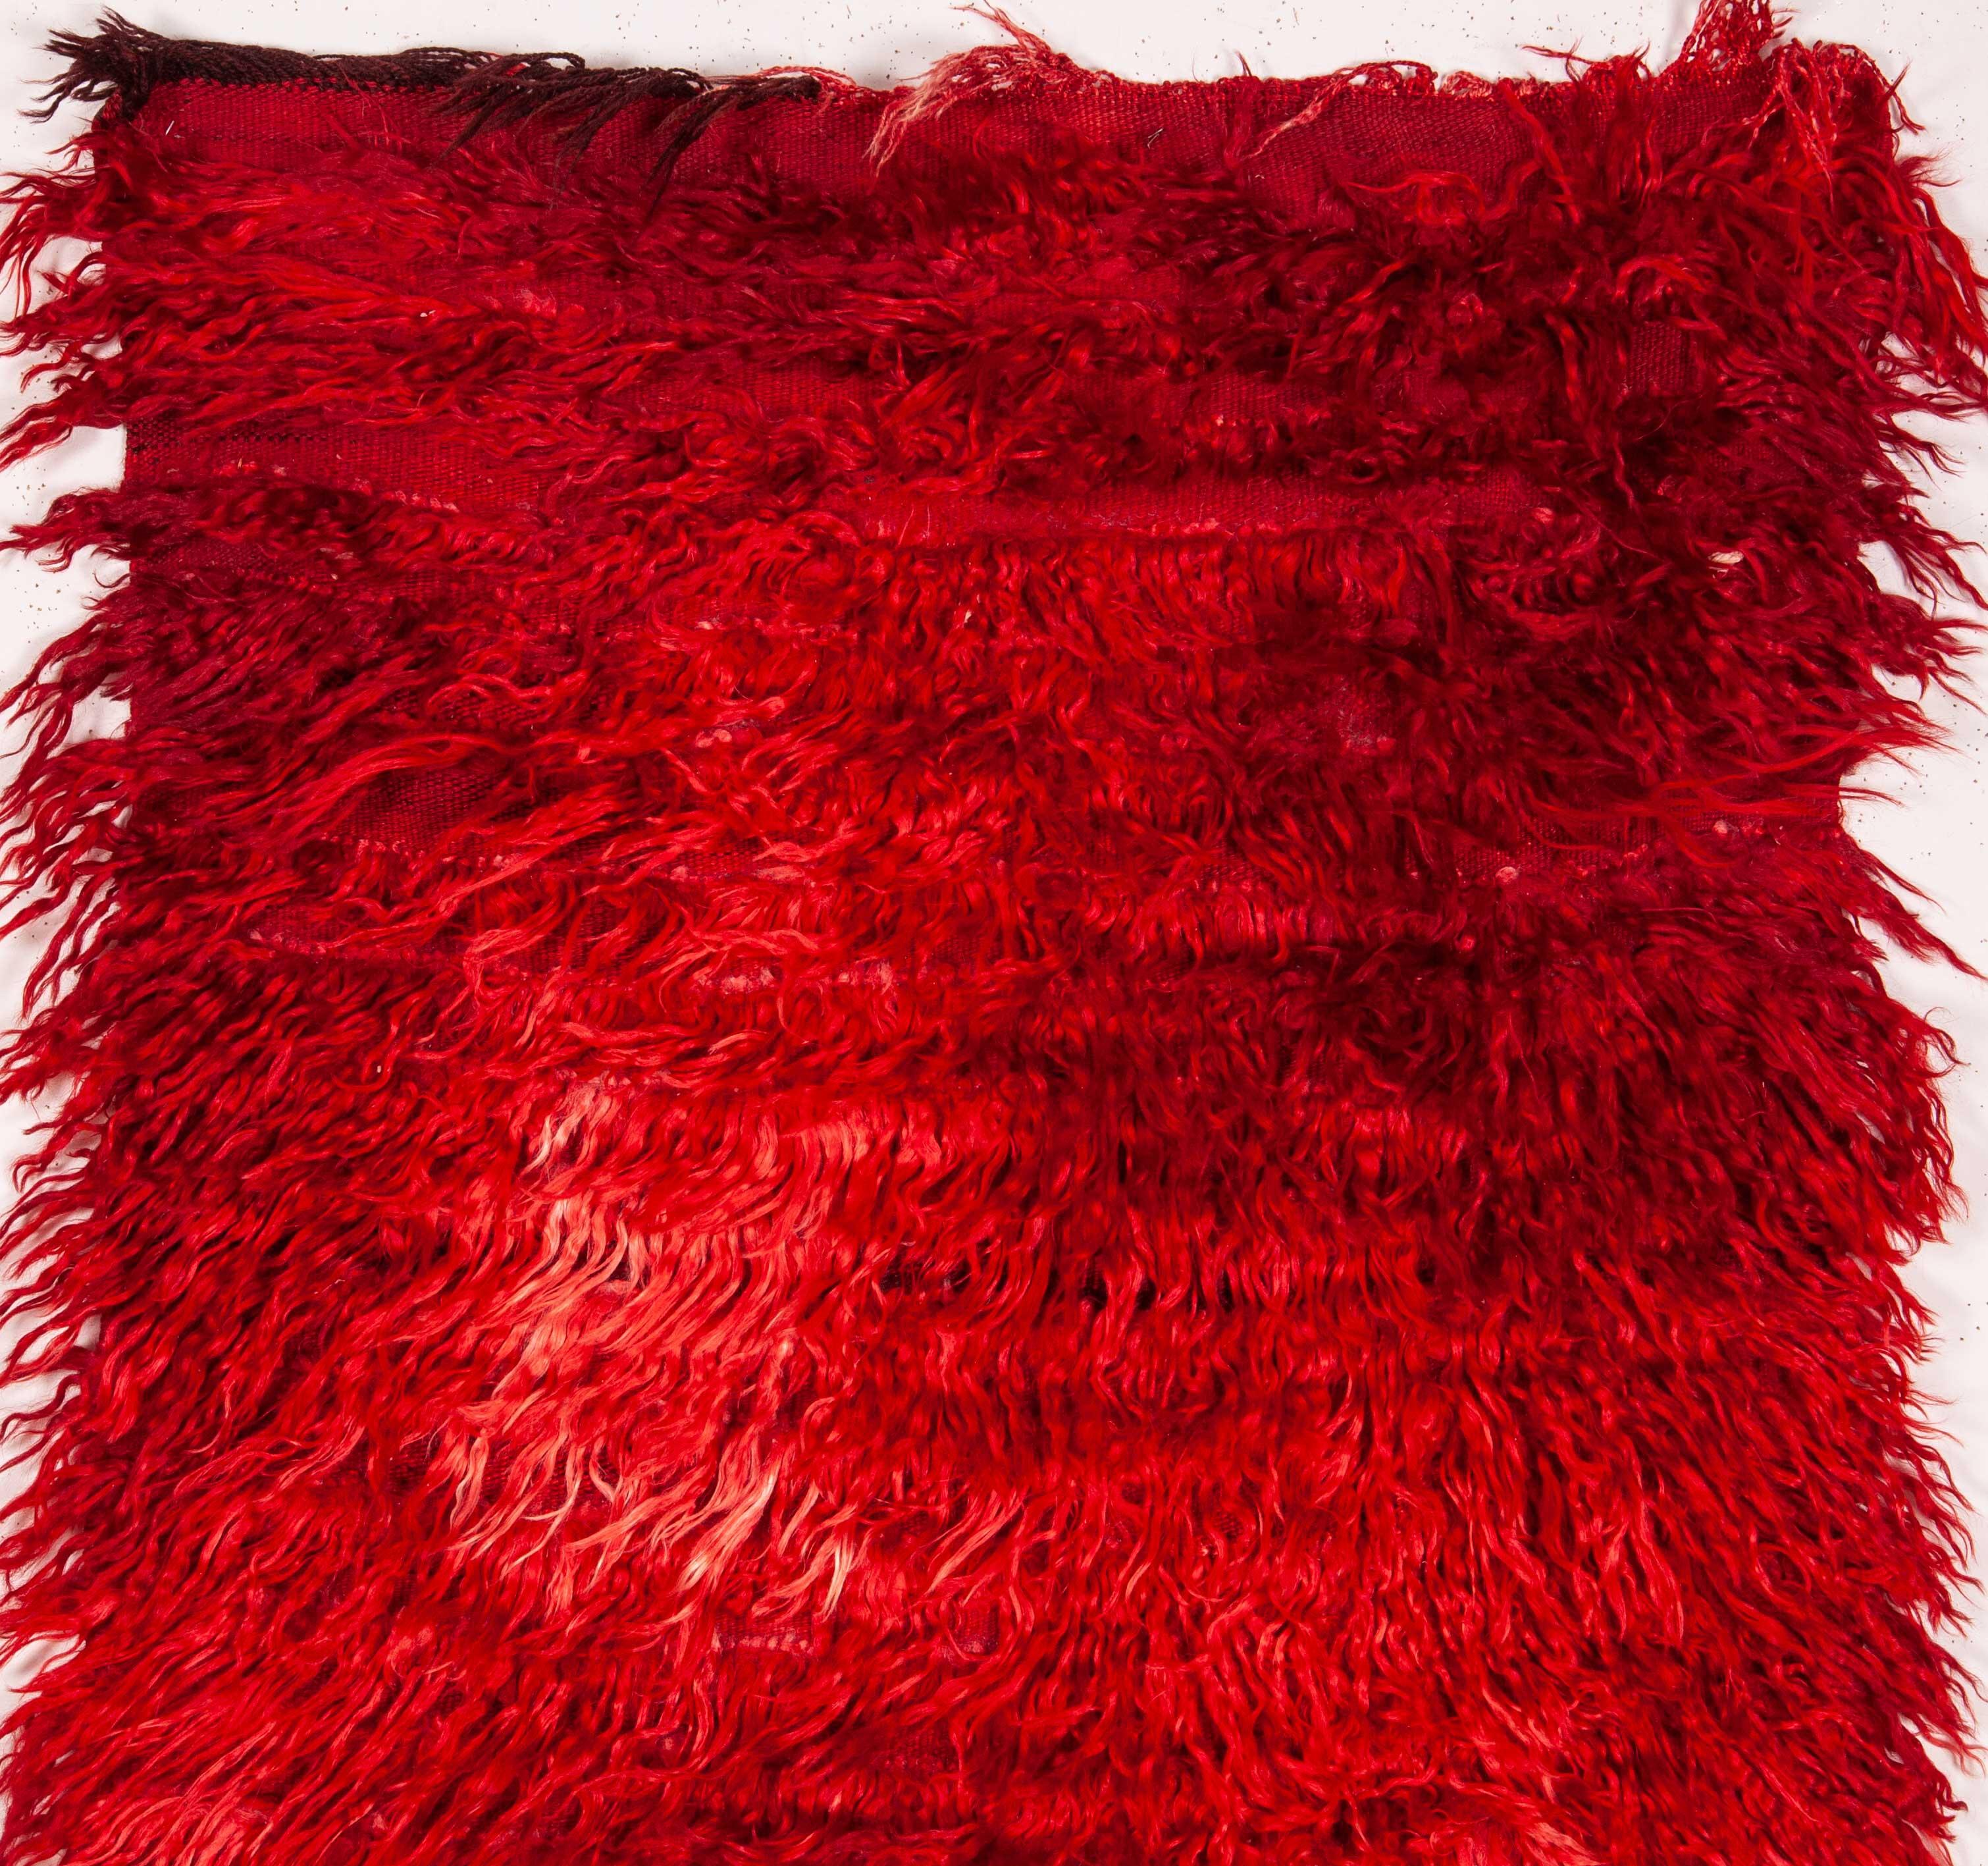 Silky mohair is used on this very rug.